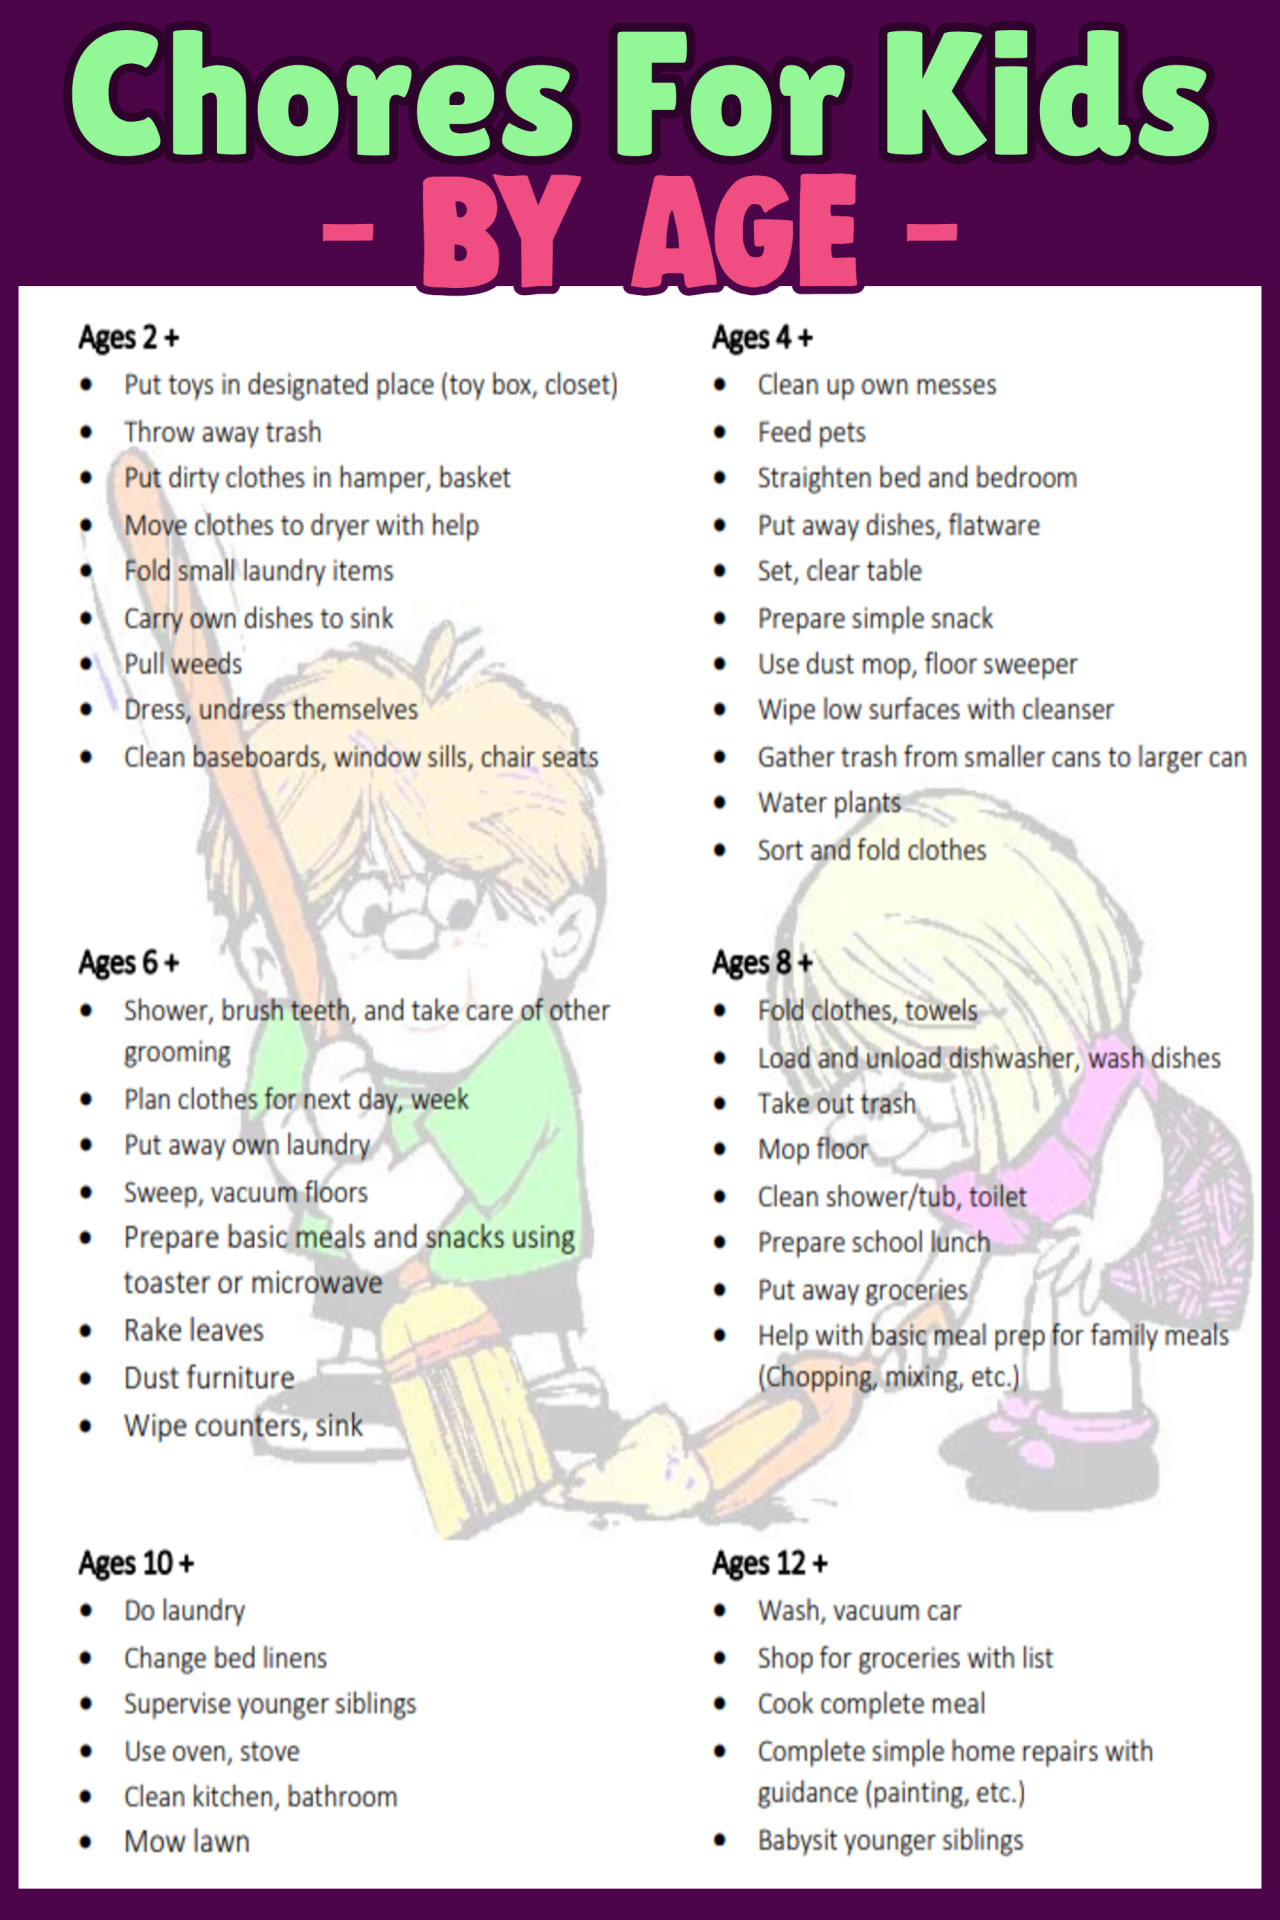 Chores for kids by age - chores for kids for chore chart ideas - age appropriate chores for kids - house chores, daily chores and household chores for kids of all ages - teens, 4, 5 6, 7, 8 years old - 10,100,12 year old tweens, perschool and toddlers chore lists too